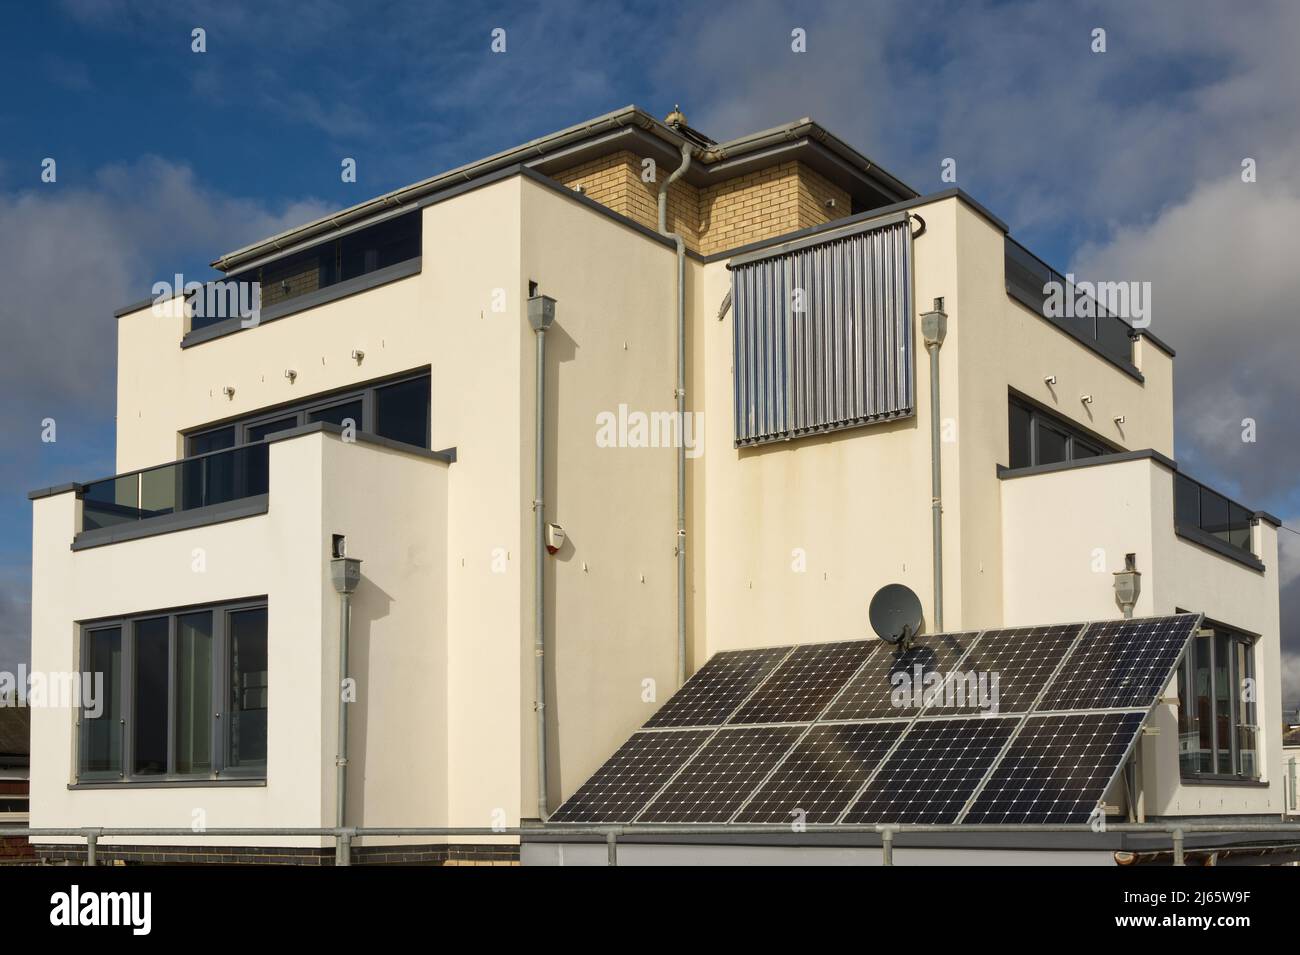 Residential house with solar panels for electricty generation and hot water. Bognor Regis in West Sussex, England Stock Photo